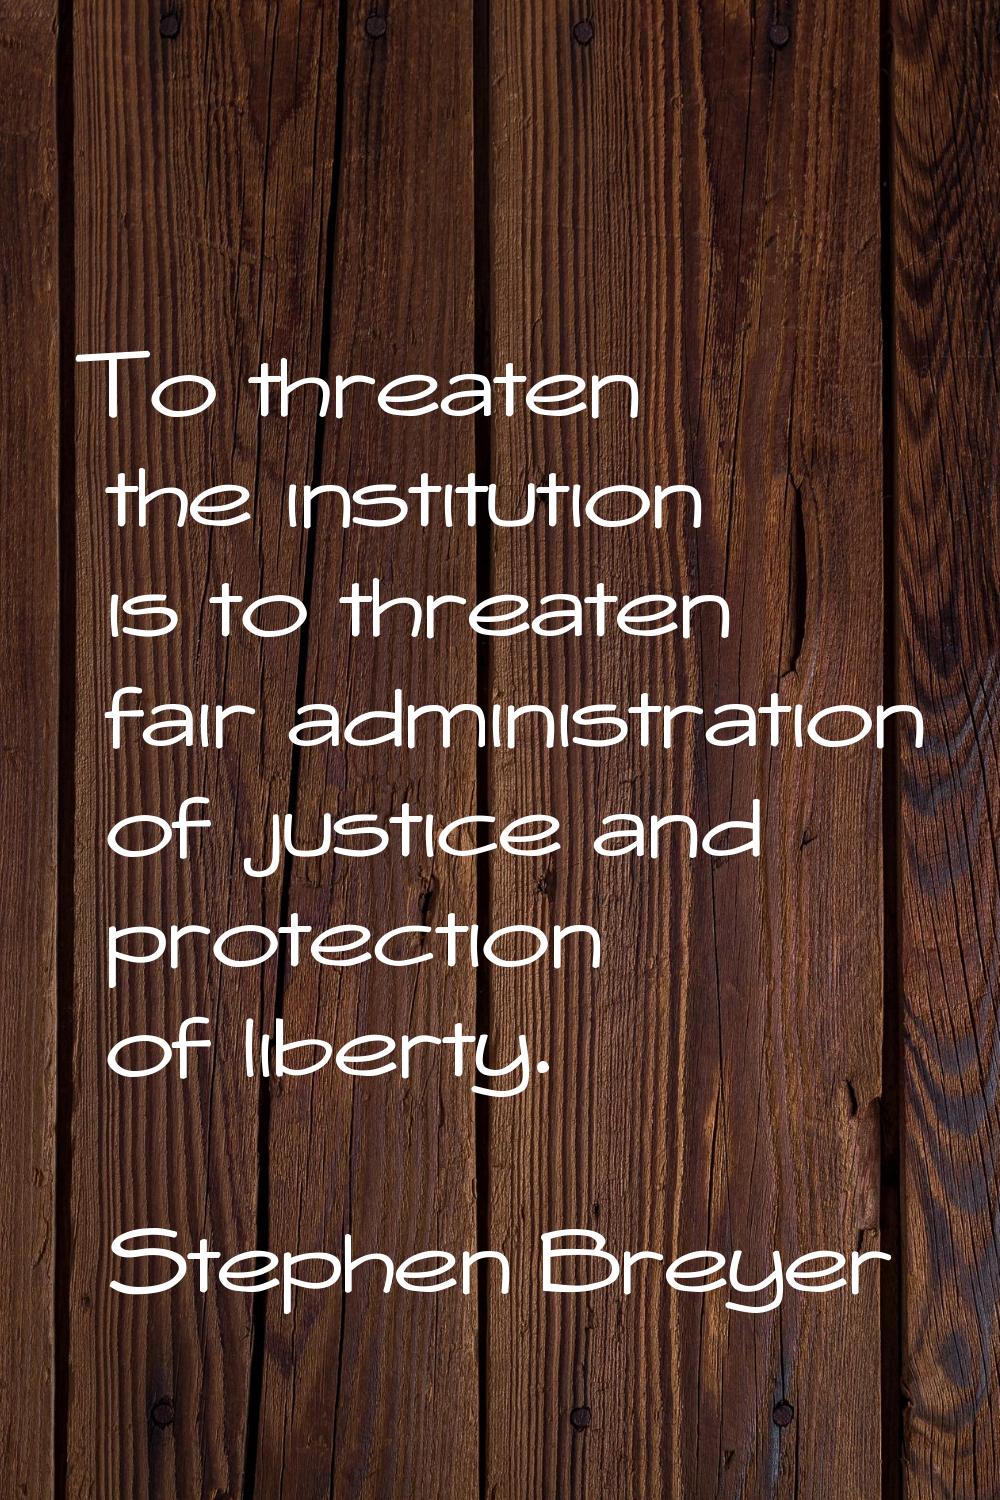 To threaten the institution is to threaten fair administration of justice and protection of liberty